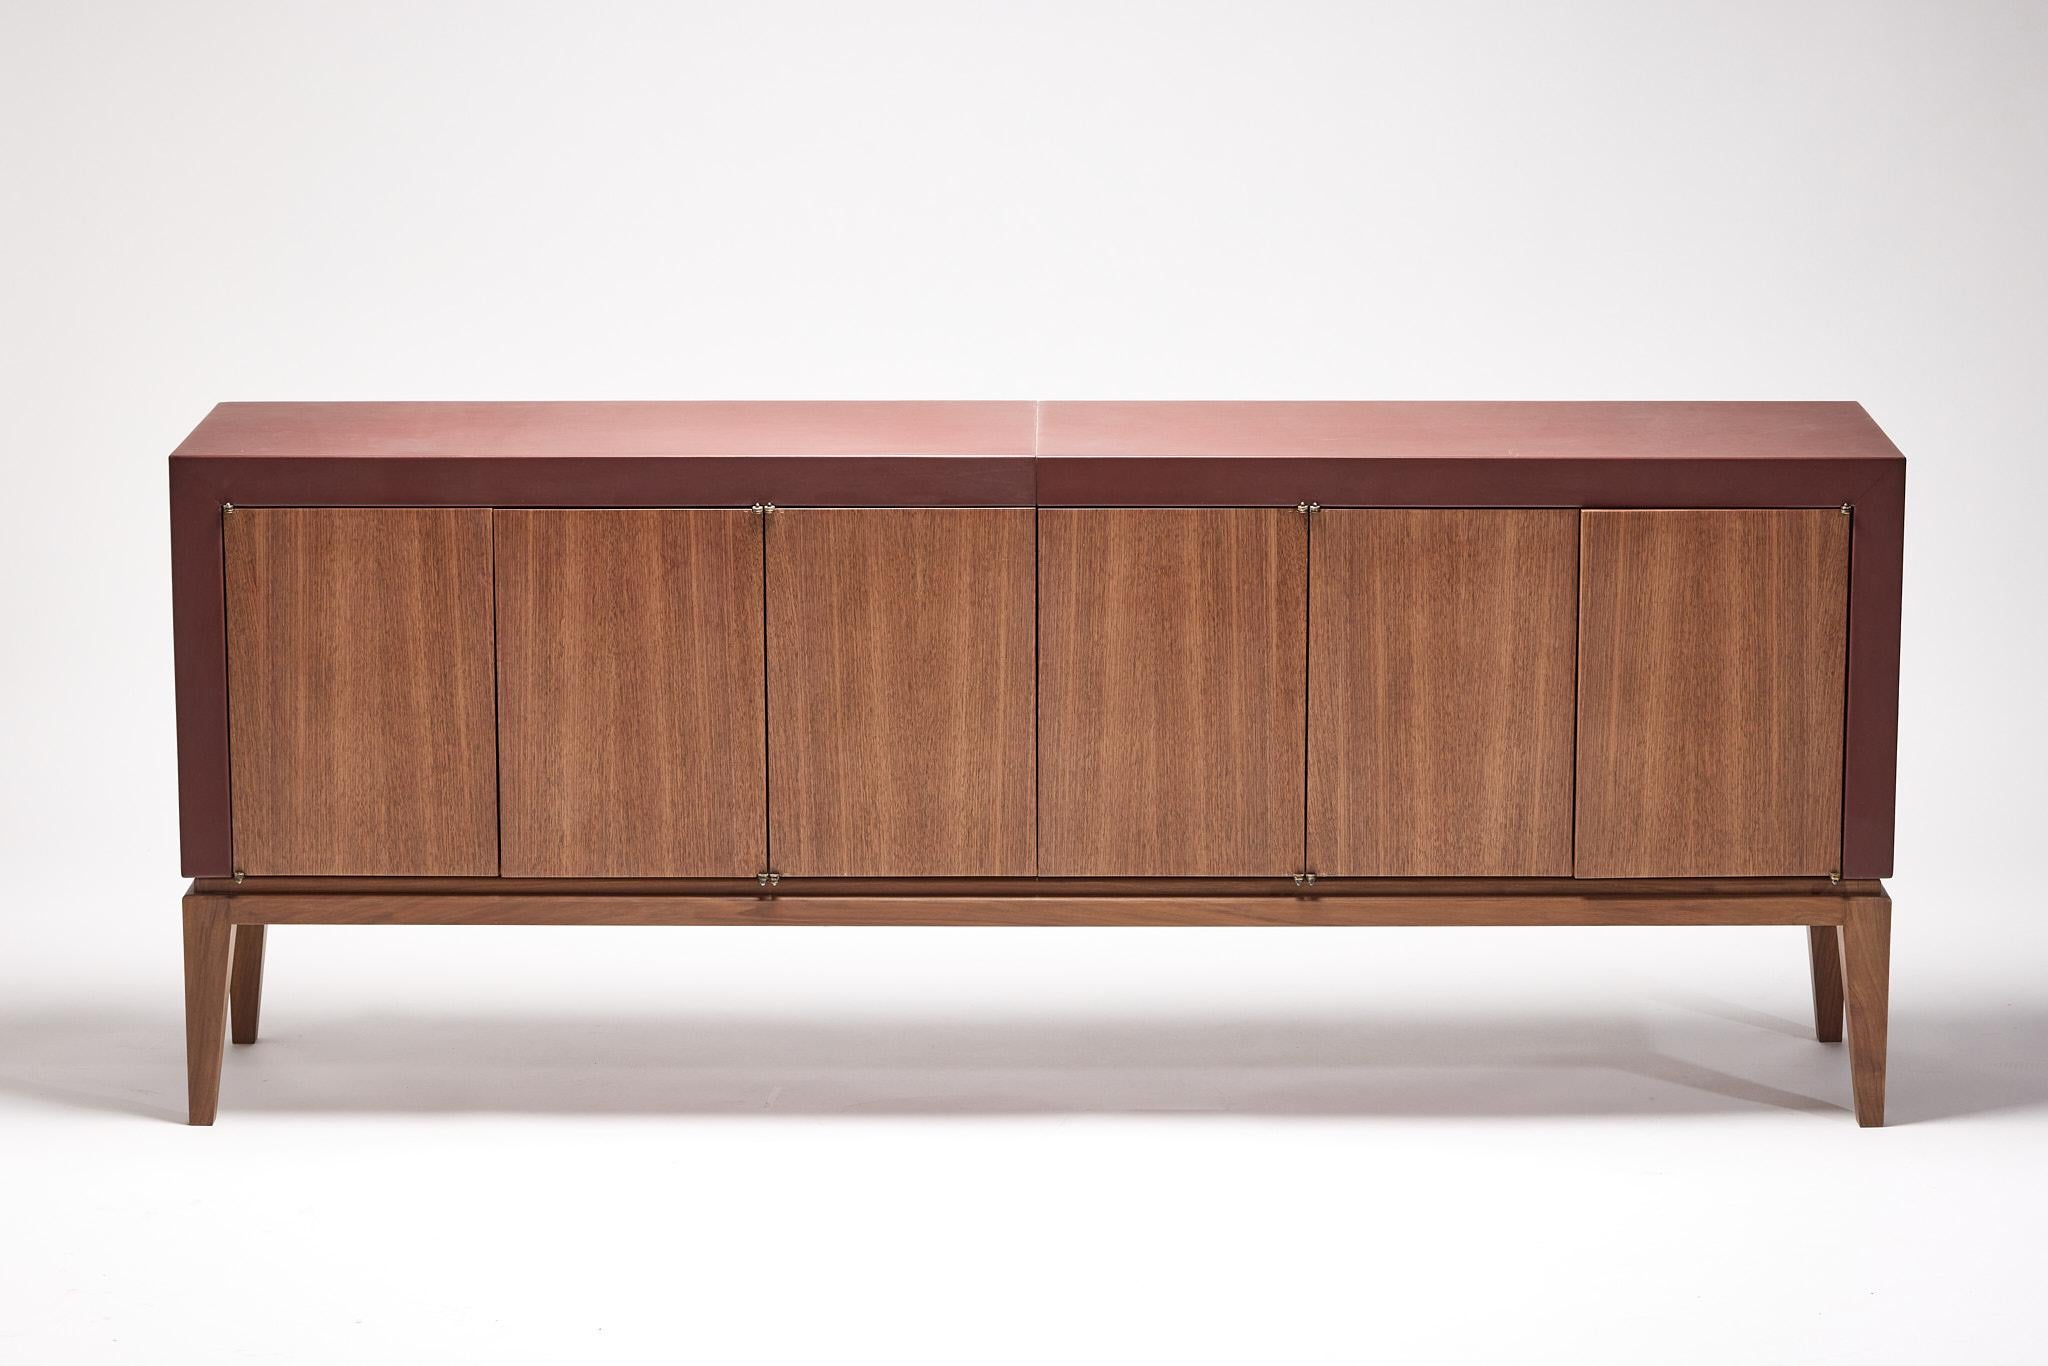 Sideboard in leather ( top and sides) and Walnut
One-off.